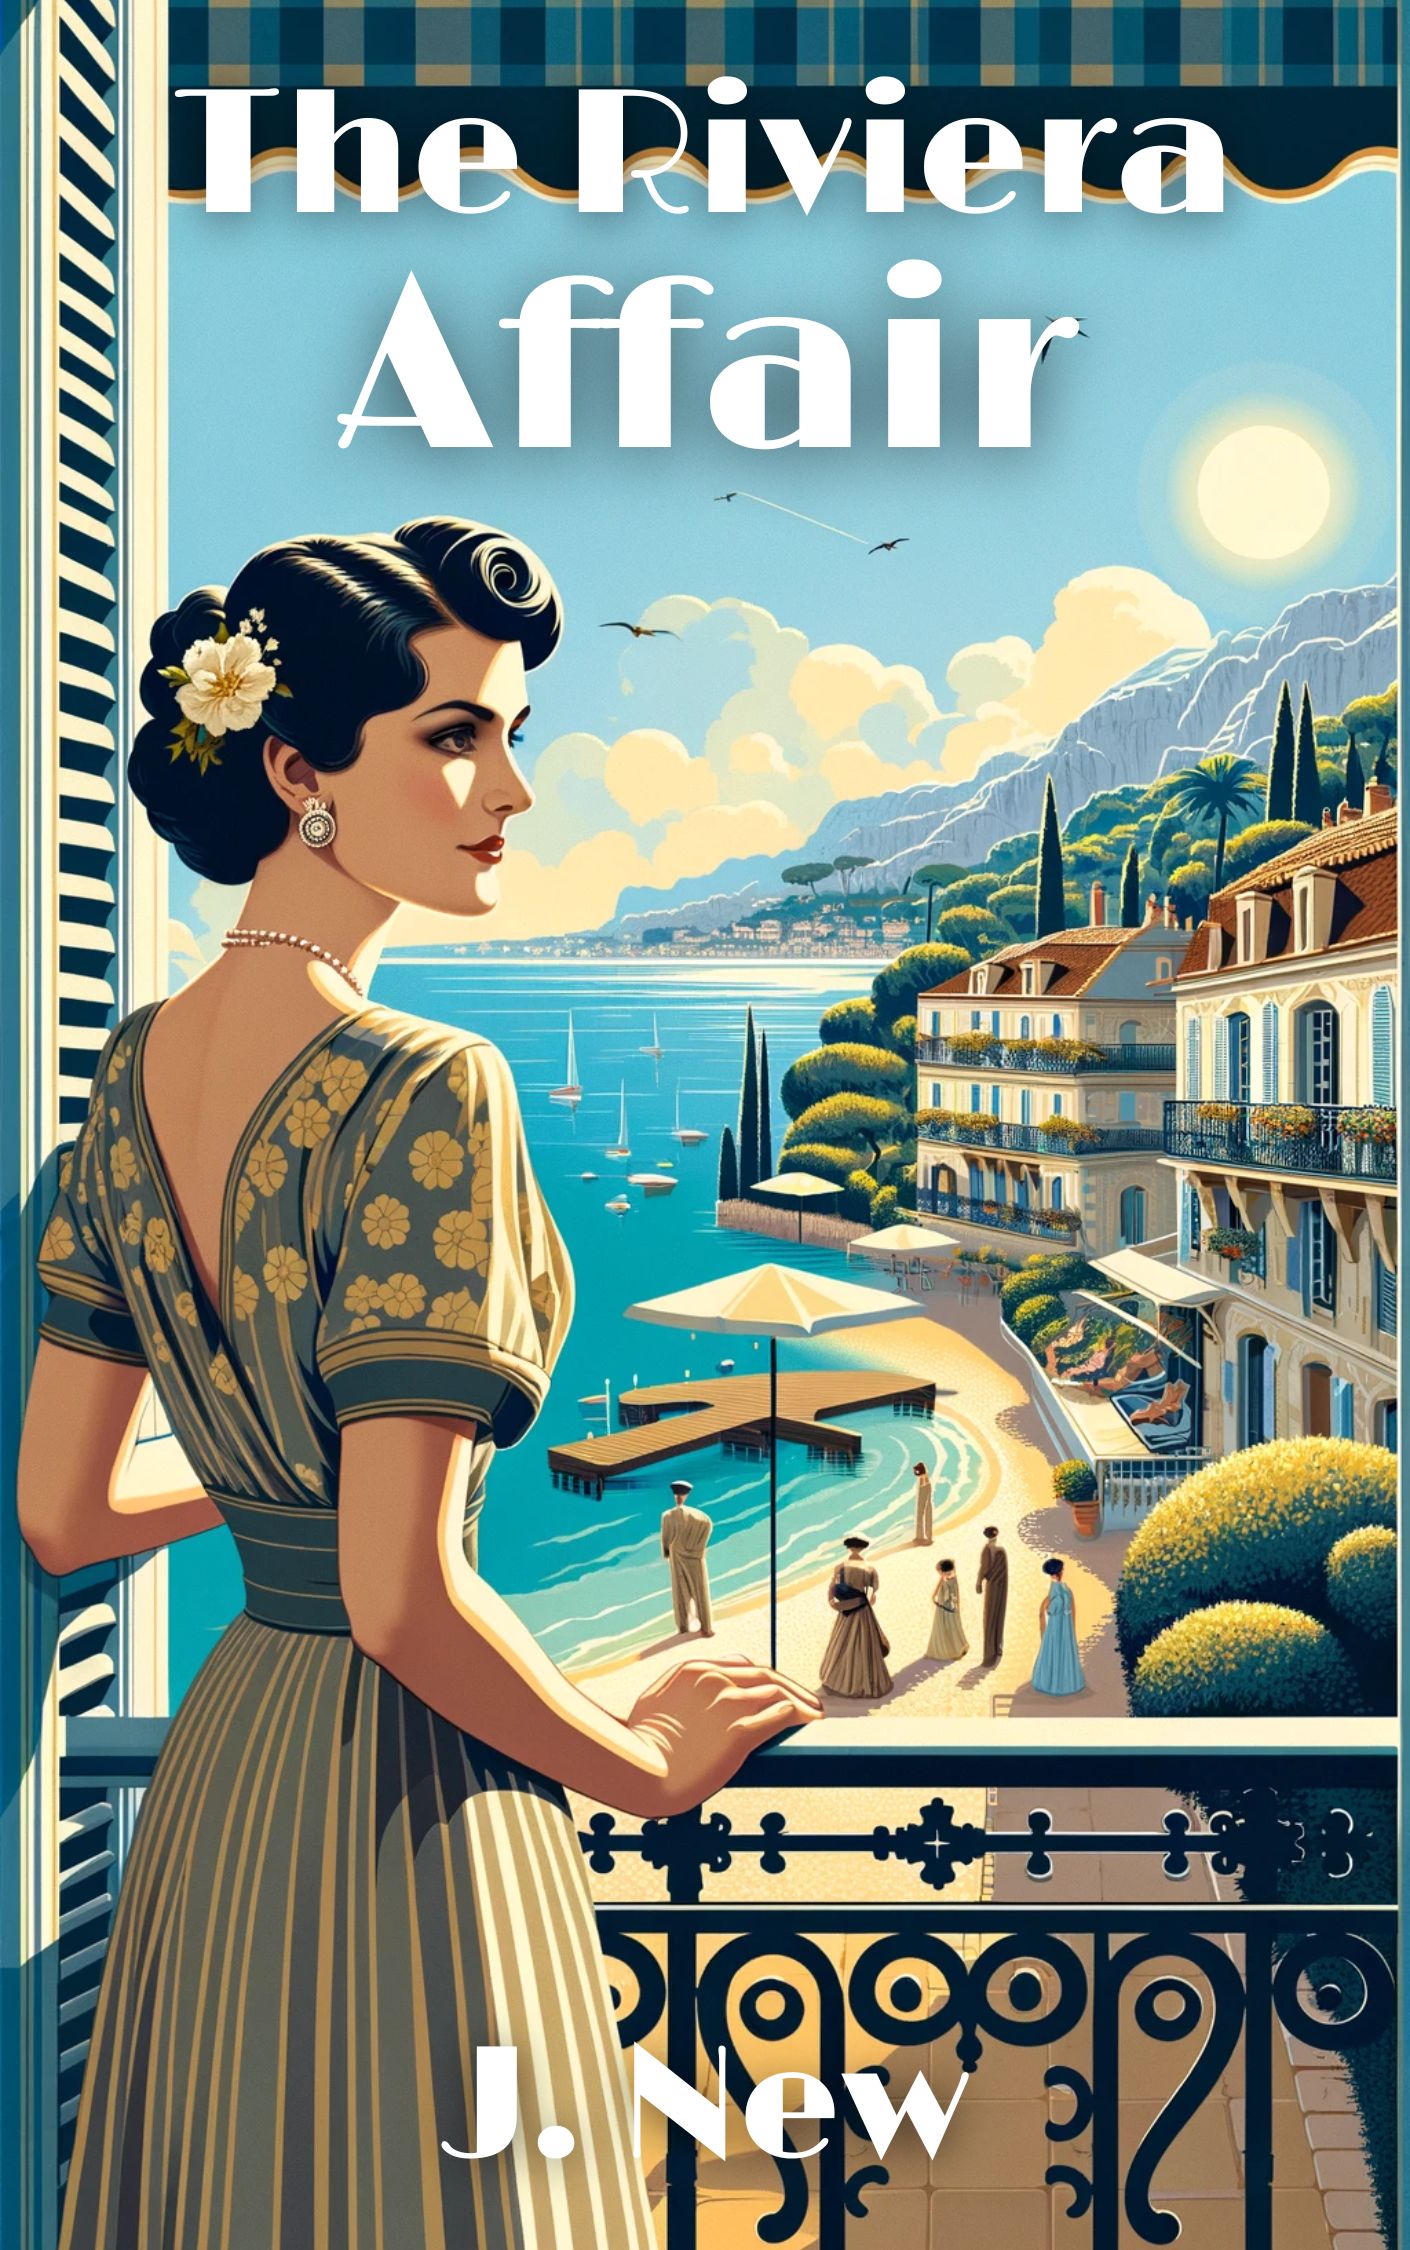 The Riviera Affair book 4 in the hugely popular British cozy 1930s historical mystery series by British author J. New